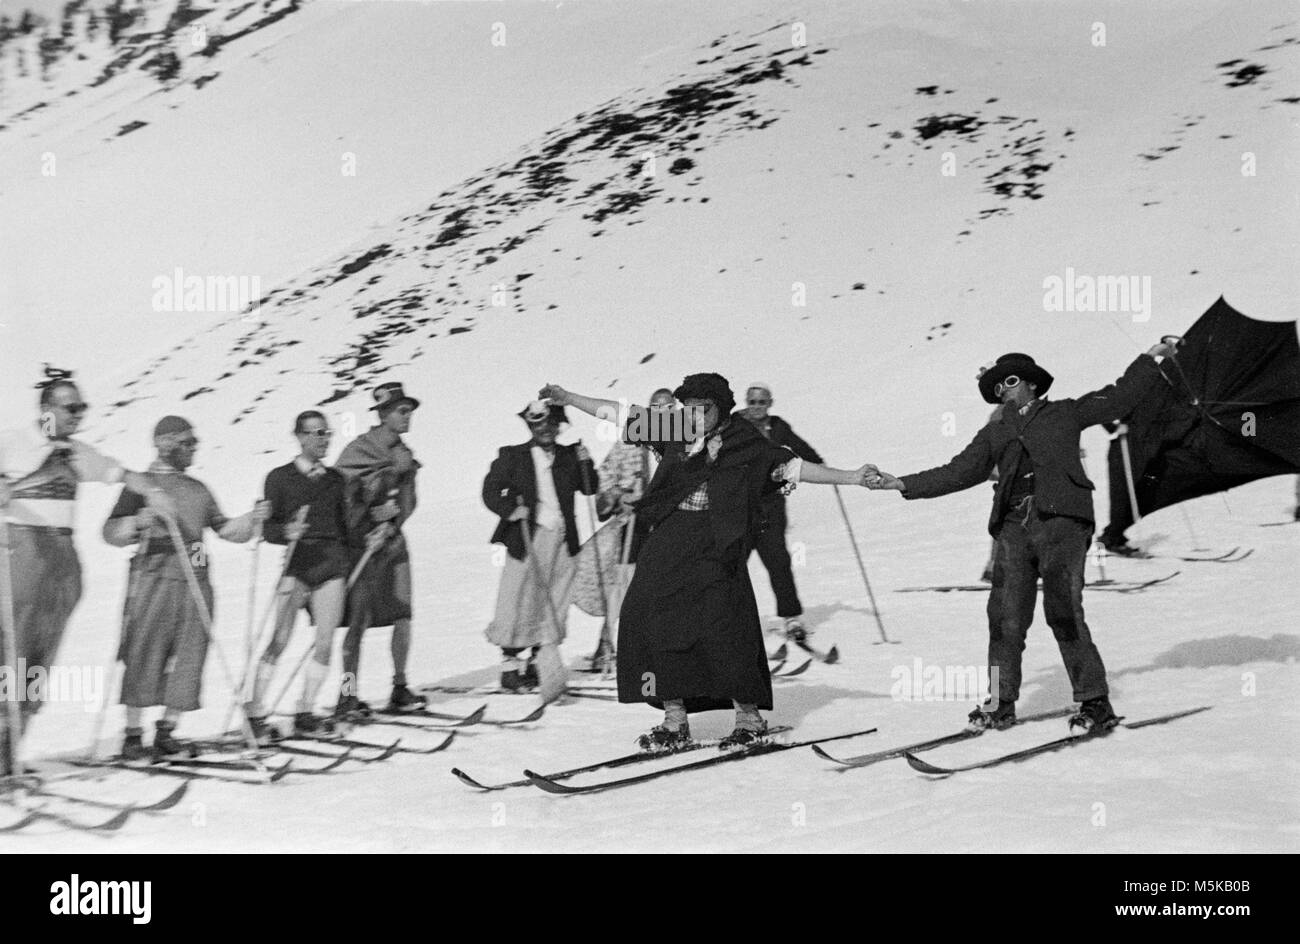 Skiing in Switzerland in 1937. A group of skiers in fancy dress on the ski slopes. Stock Photo